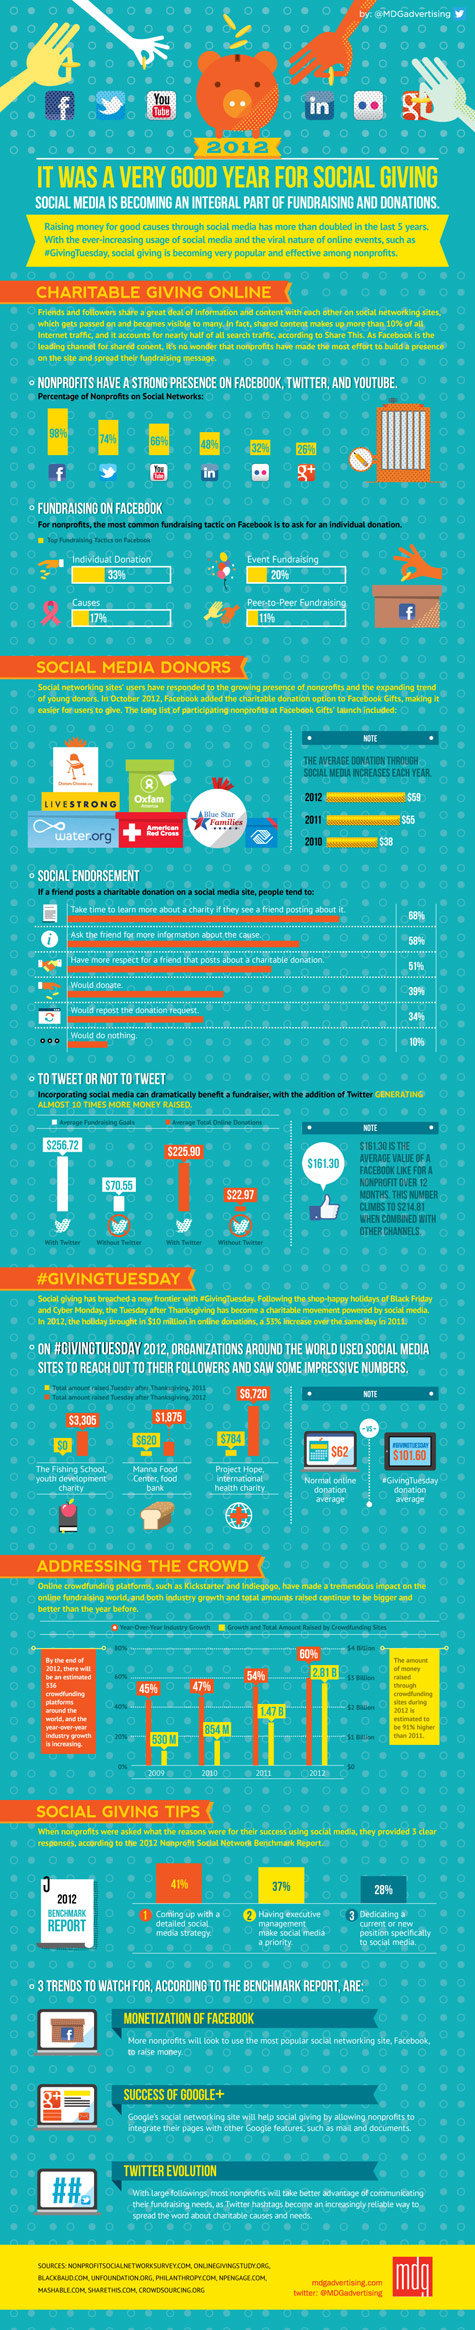 2012: It Was a Very Good Year for Social Giving [Infographic]